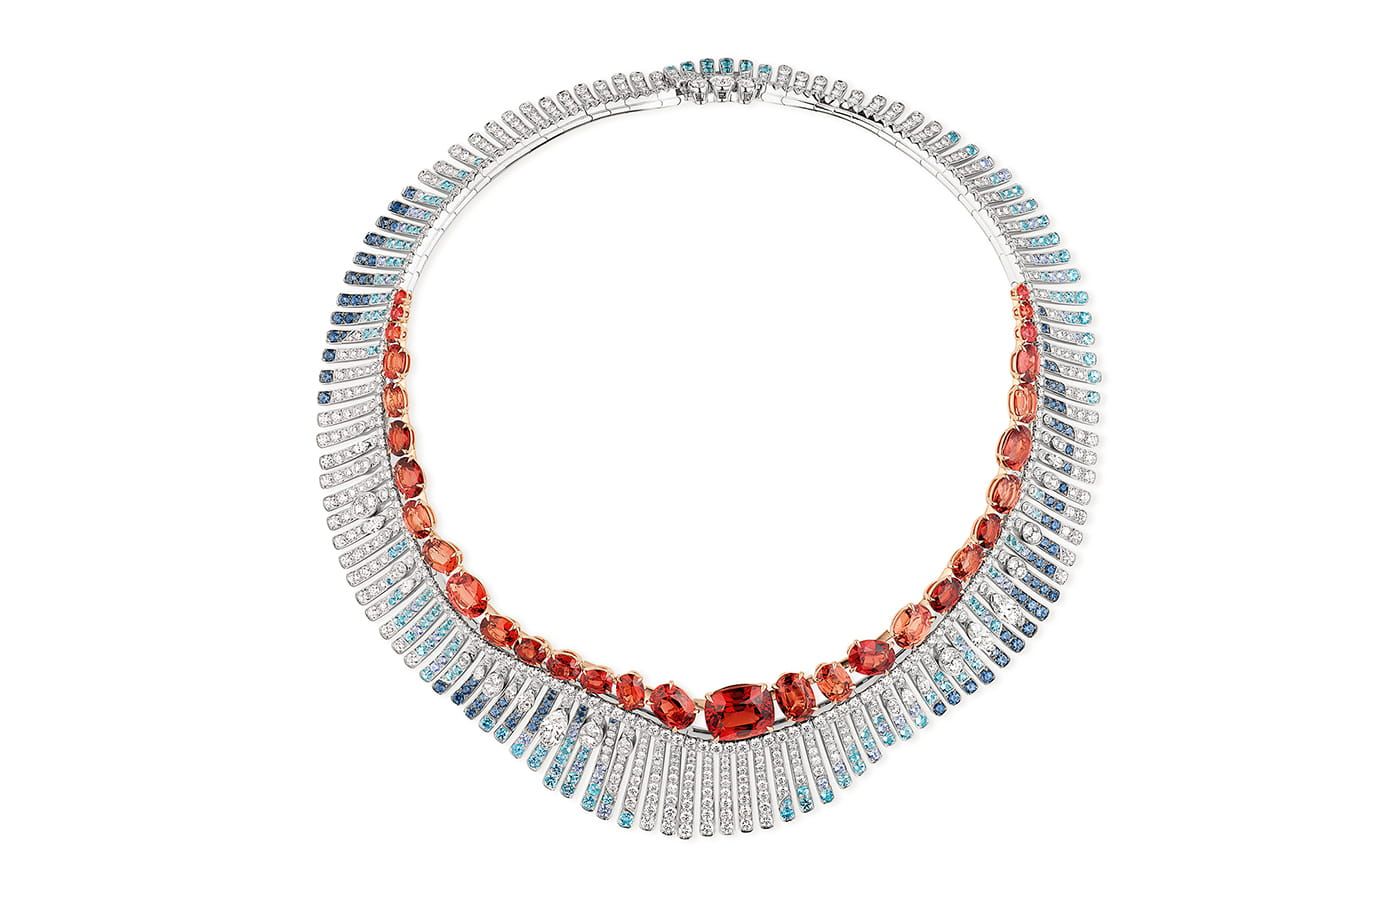 Chaumet white gold, rose gold, spinel, Paraiba tourmaline and diamond Ports of Call necklace from the Ondes et Merveilles collection